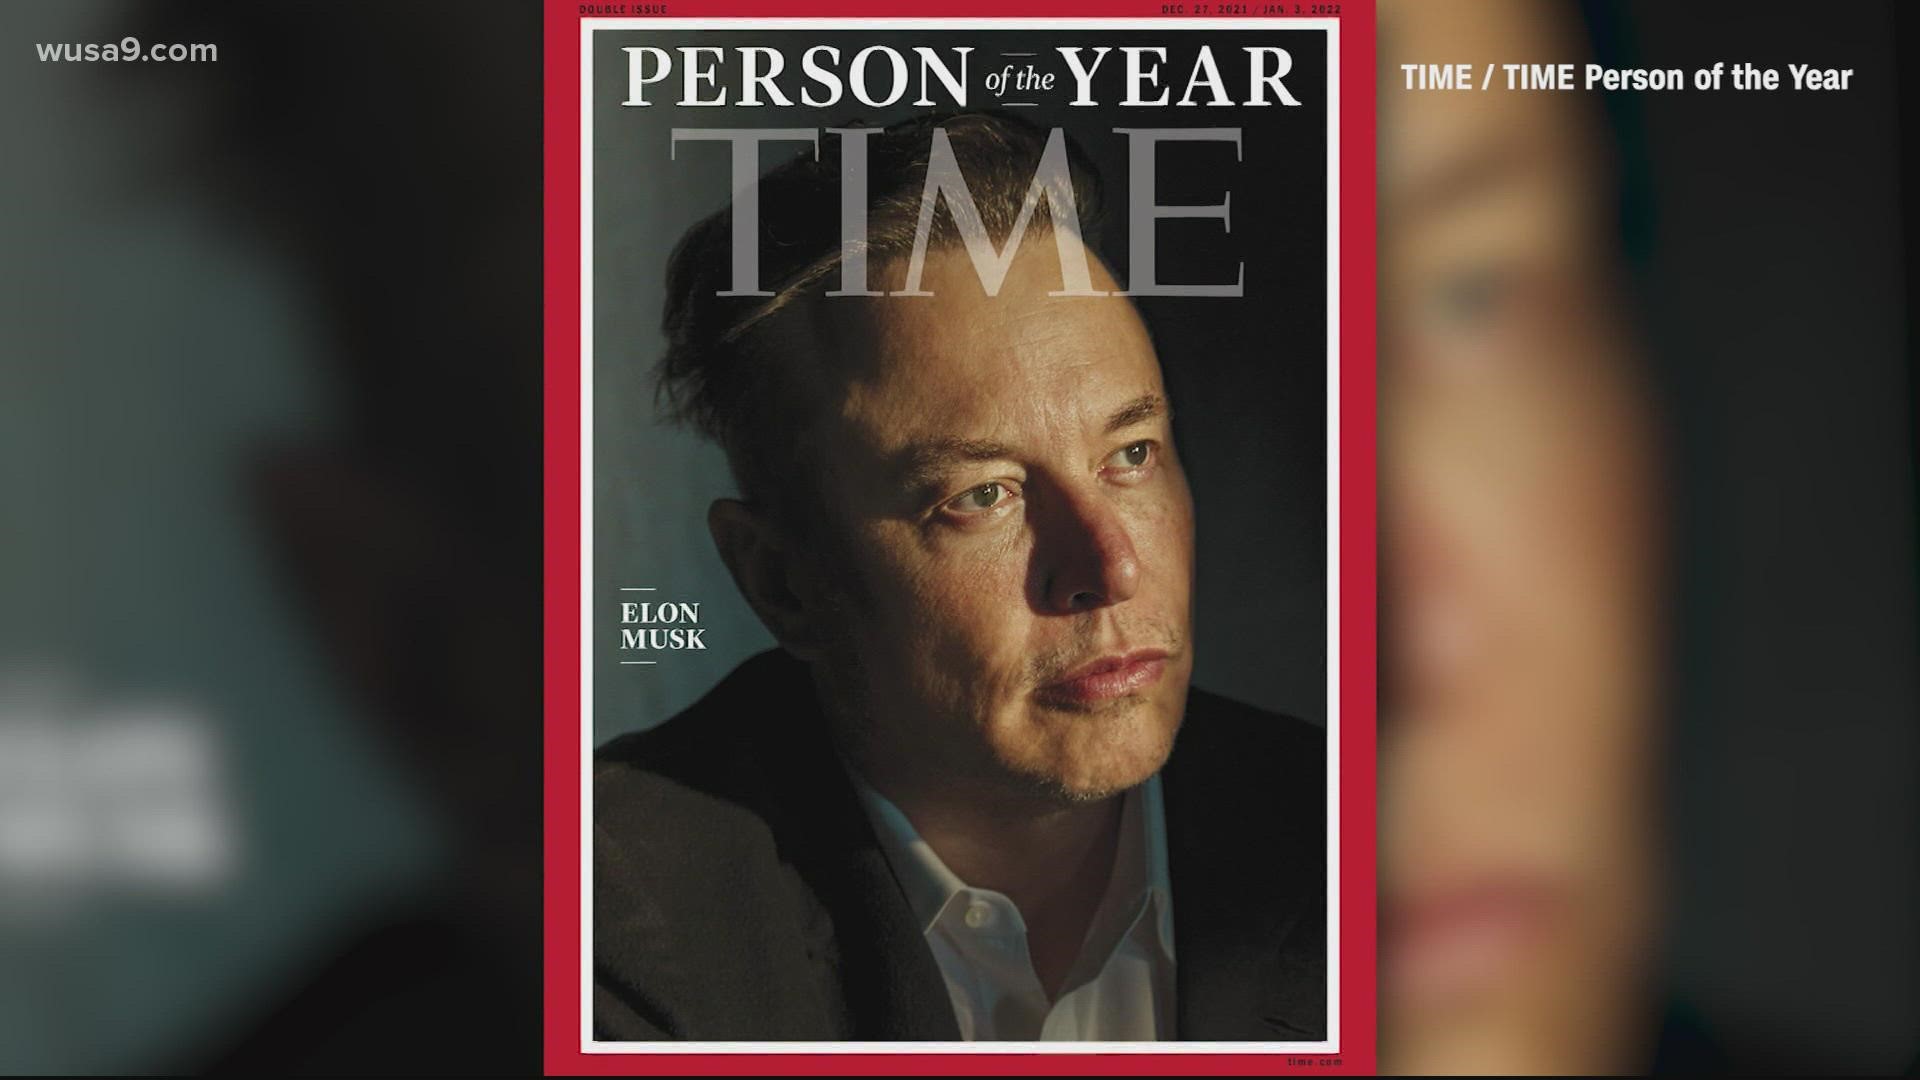 The Tesla CEO is TIME's "Person of the Year" for 2021.